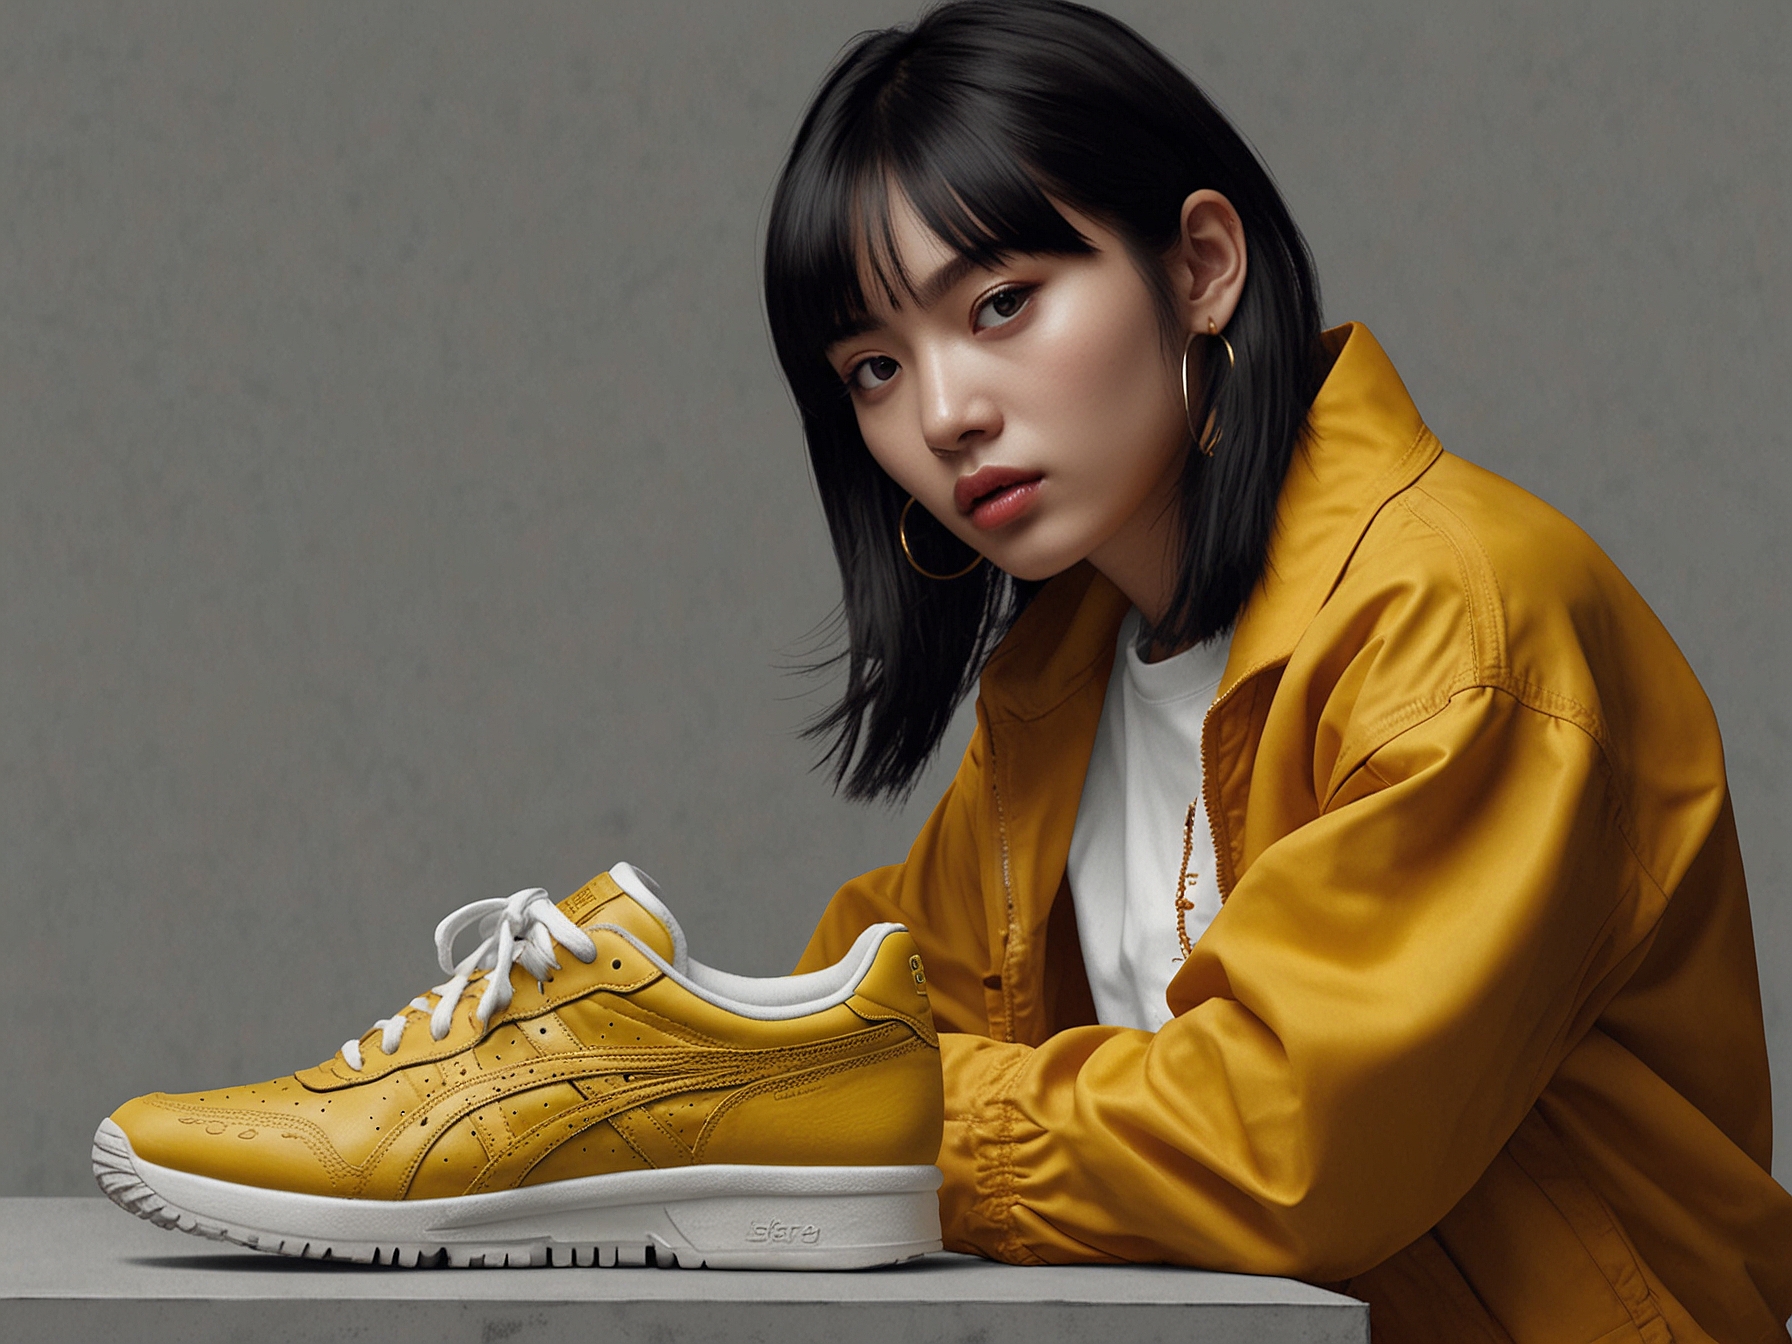 Momo collaborating in an Onitsuka Tiger campaign, wearing the brand's signature yellow hue. The blend of traditional fashion elements and contemporary digital artistry symbolizes her evolving style.